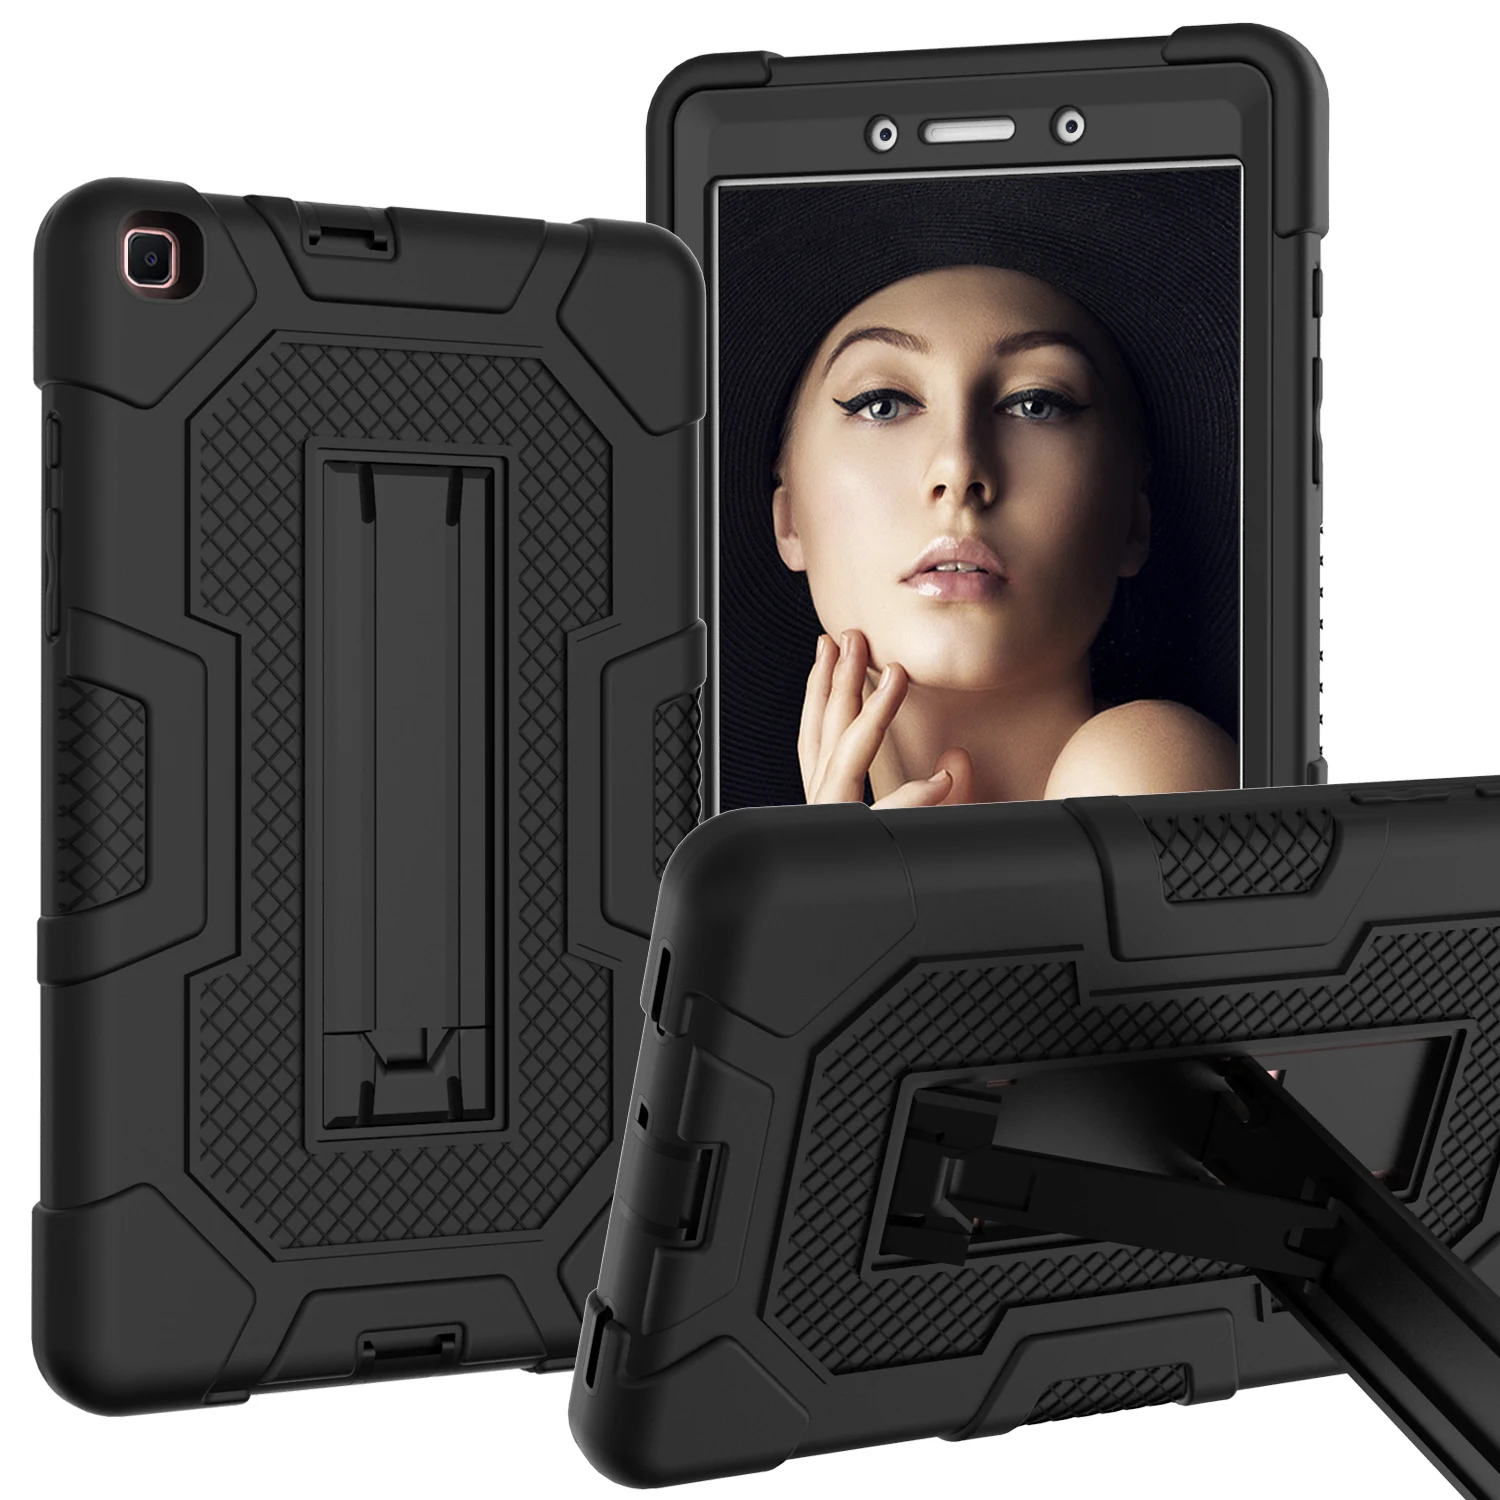 

Heavy Duty Case For Samsung Galaxy Tab A 8.0 Inch T290 /T295 Rugged Tough Armor Defender Shockproof Kickstand Tablet Cover